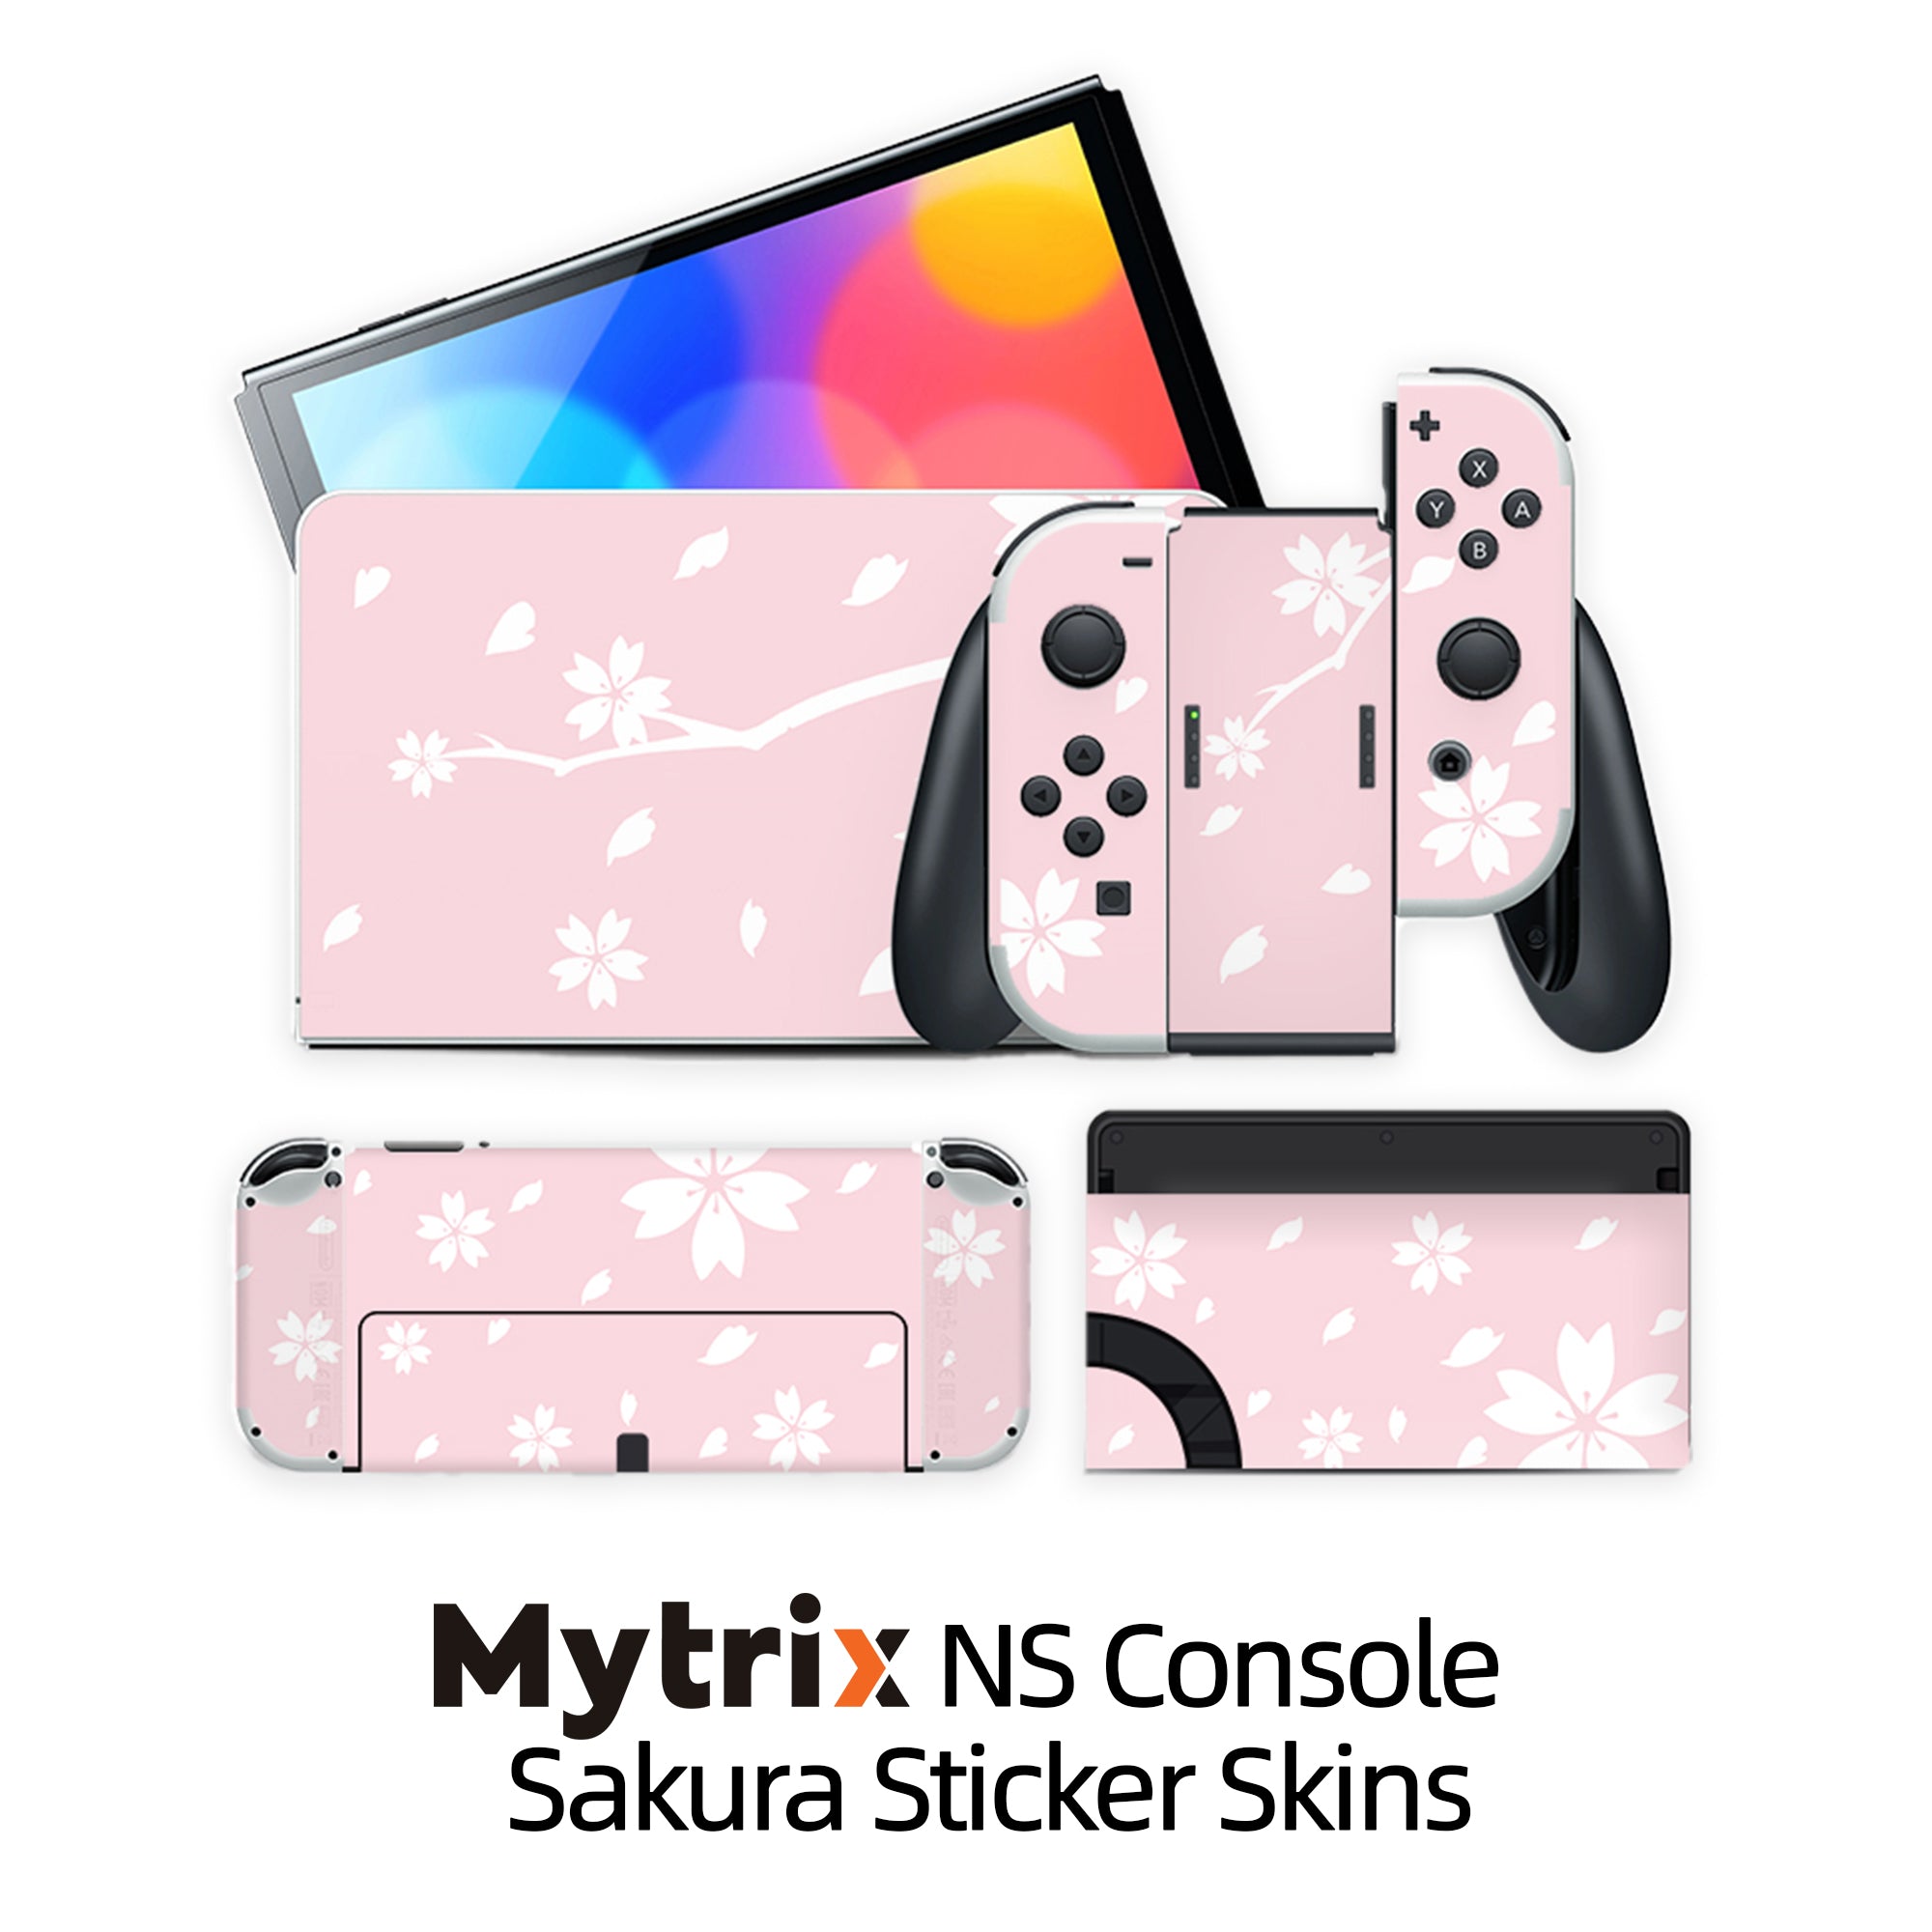 2022 New Nintendo Switch OLED Model Neon Red Blue with Fire Emblem: Three Houses and Mytrix Full Body Skin Sticker for NS OLED Console, Dock and Joycons - Sakura Pink